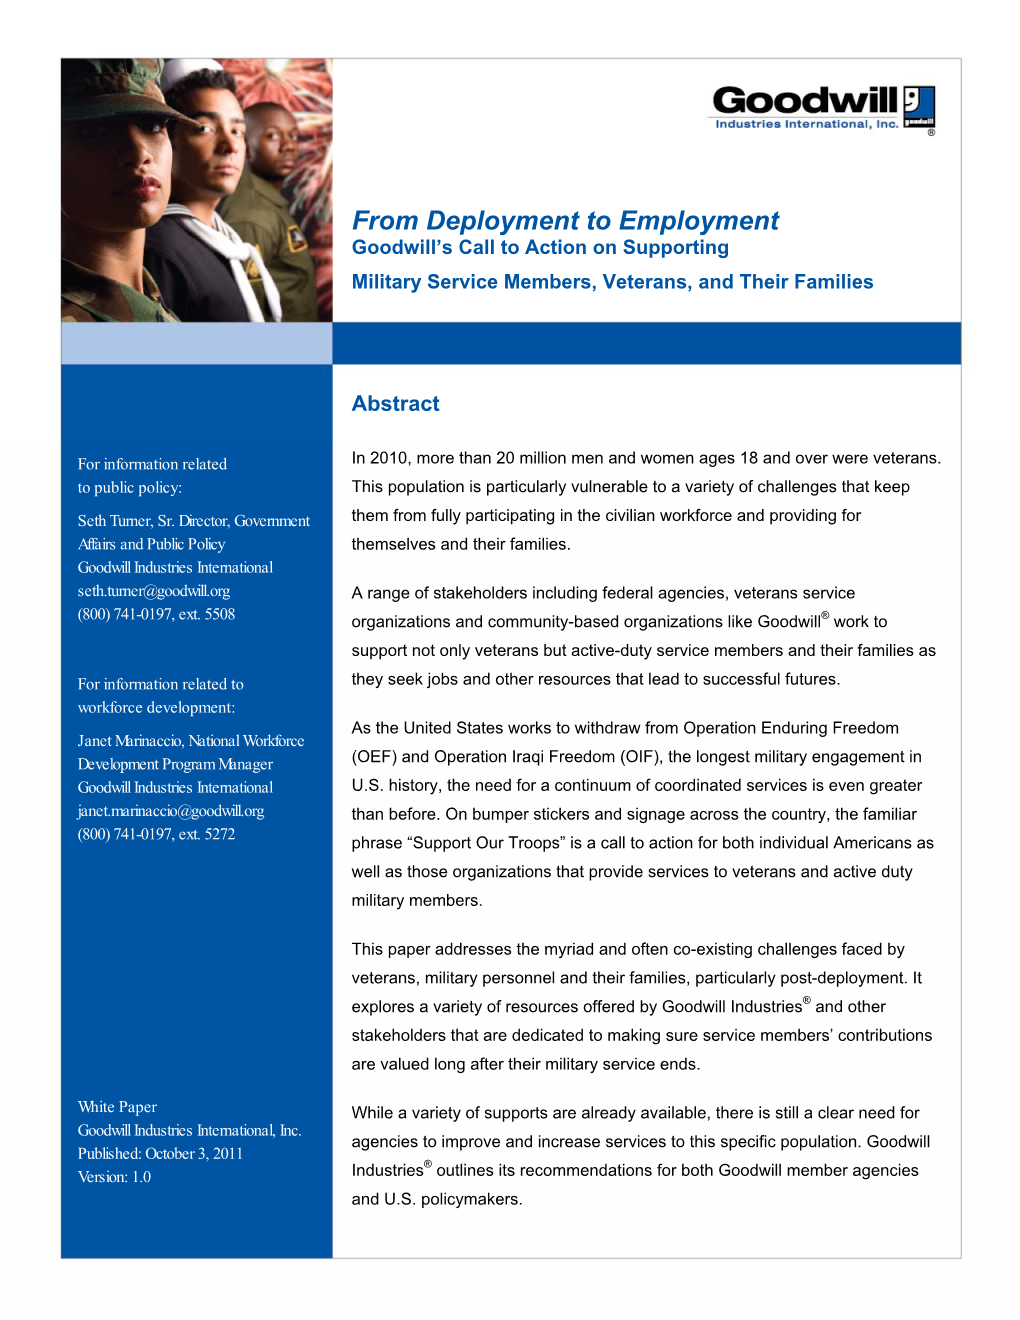 From Deployment to Employment Goodwill’S Call to Action on Supporting Military Service Members, Veterans, and Their Families